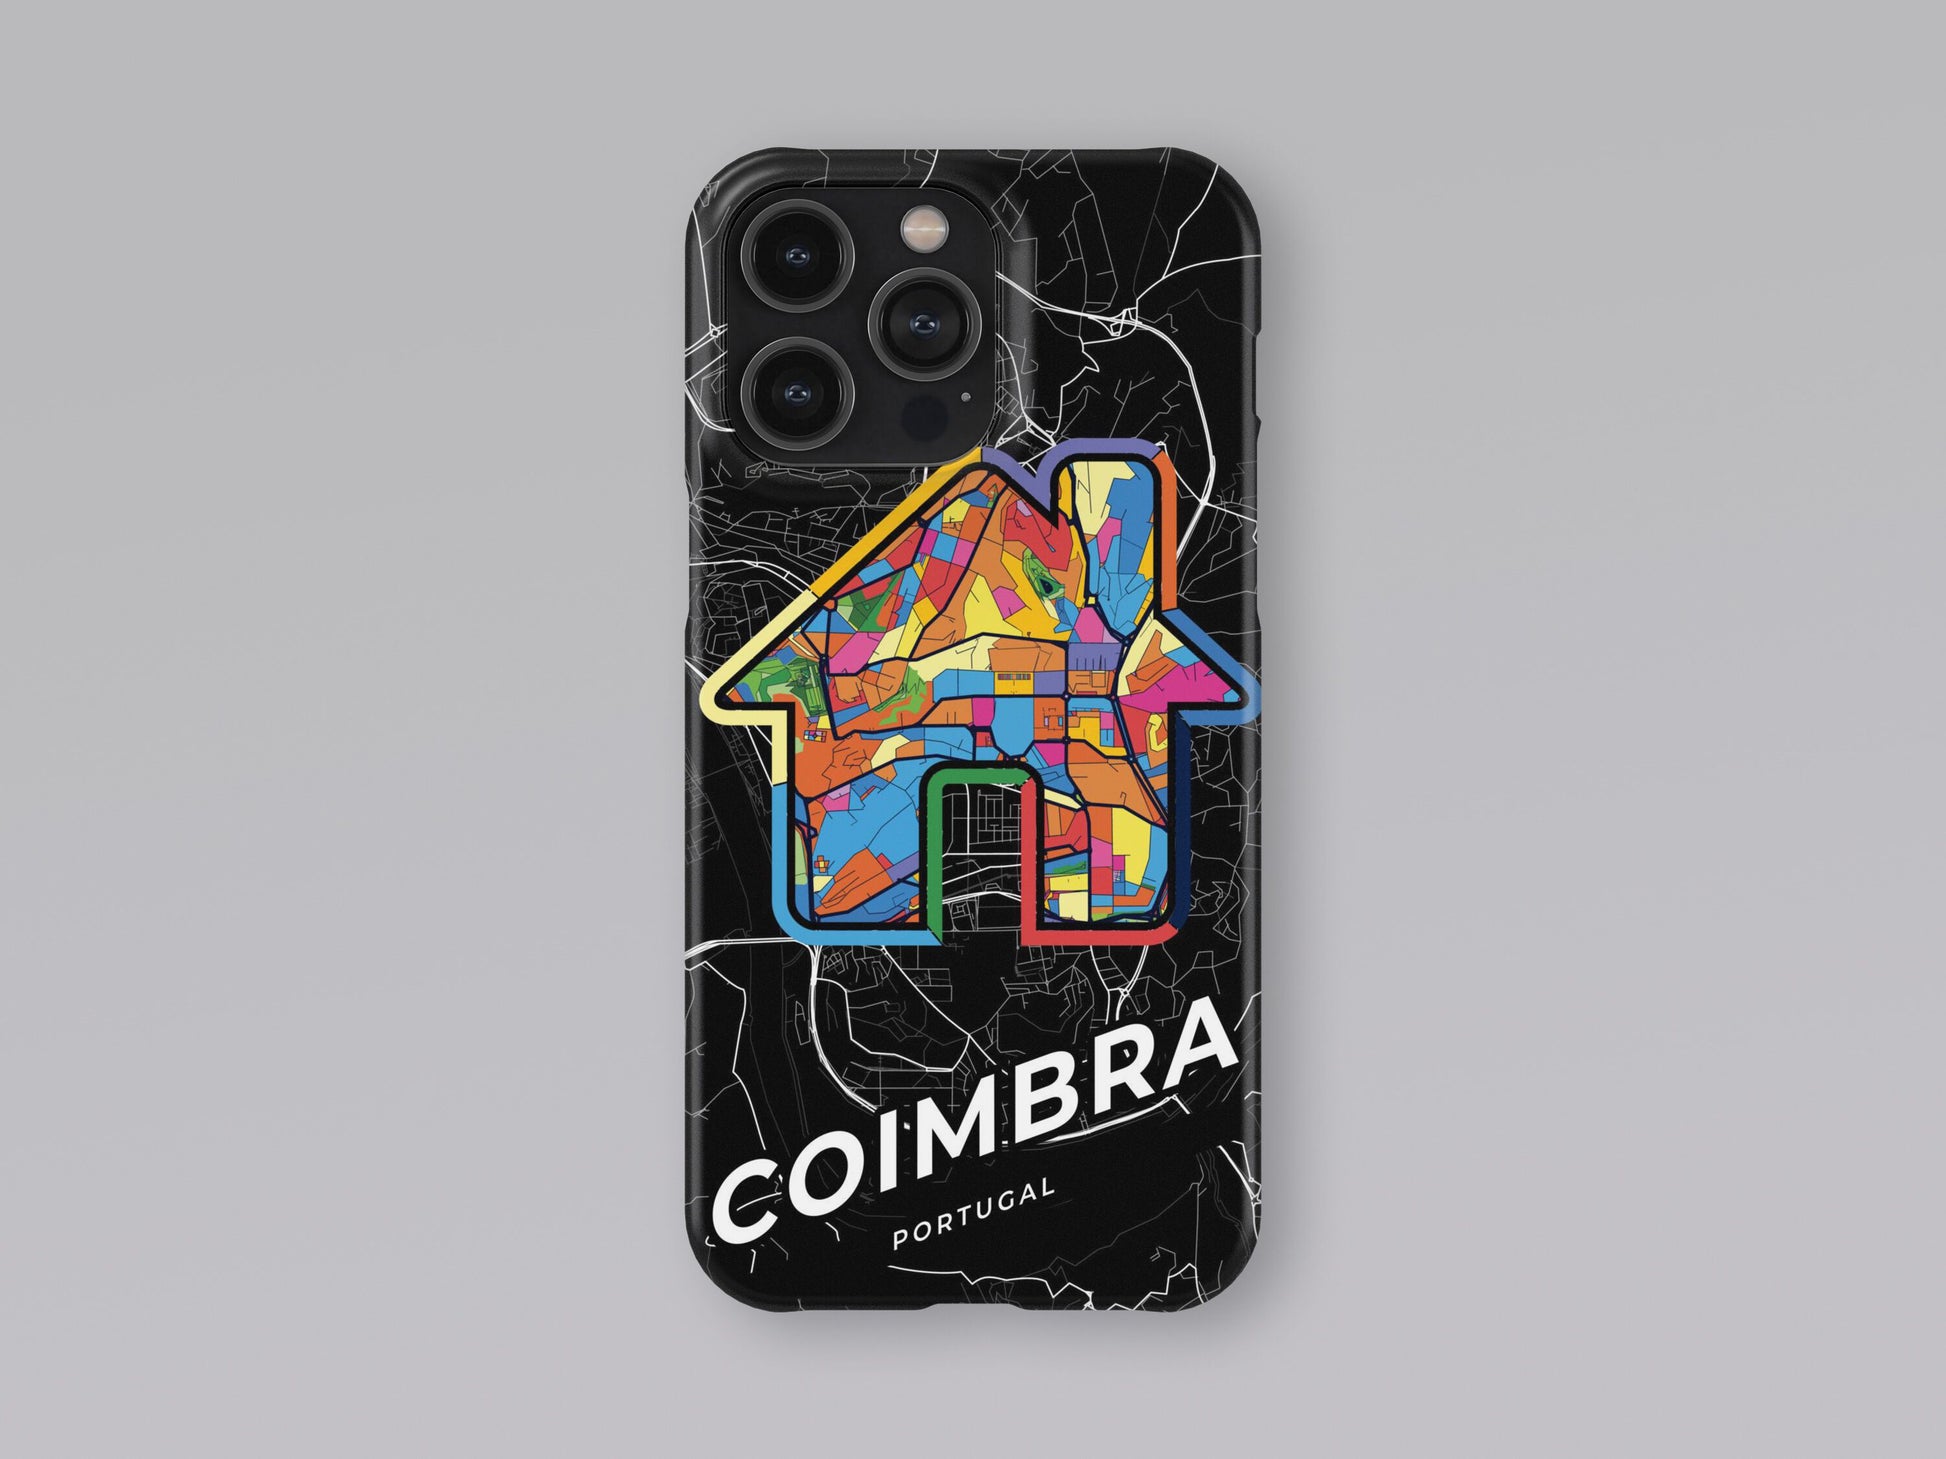 Coimbra Portugal slim phone case with colorful icon. Birthday, wedding or housewarming gift. Couple match cases. 3